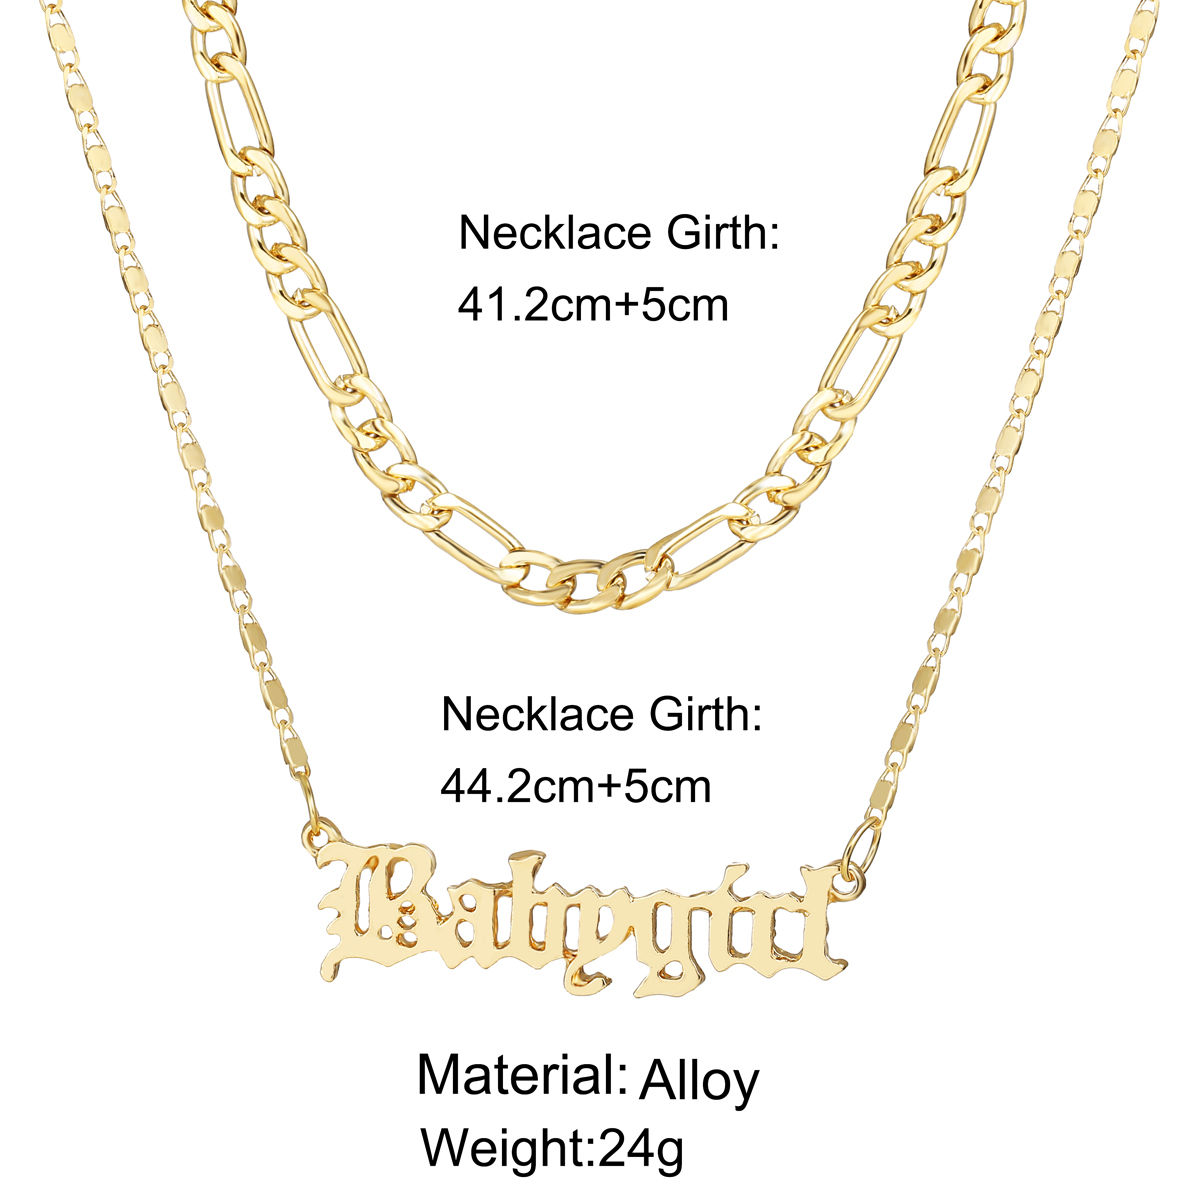 Tiny Baby Girl Choker Stainless Steel Chain Babygirl Charm Necklace Pendant  Gold Filled Kolye Friends Gift Jewelry4481249 From Fzcte1, $26.66 |  DHgate.Com